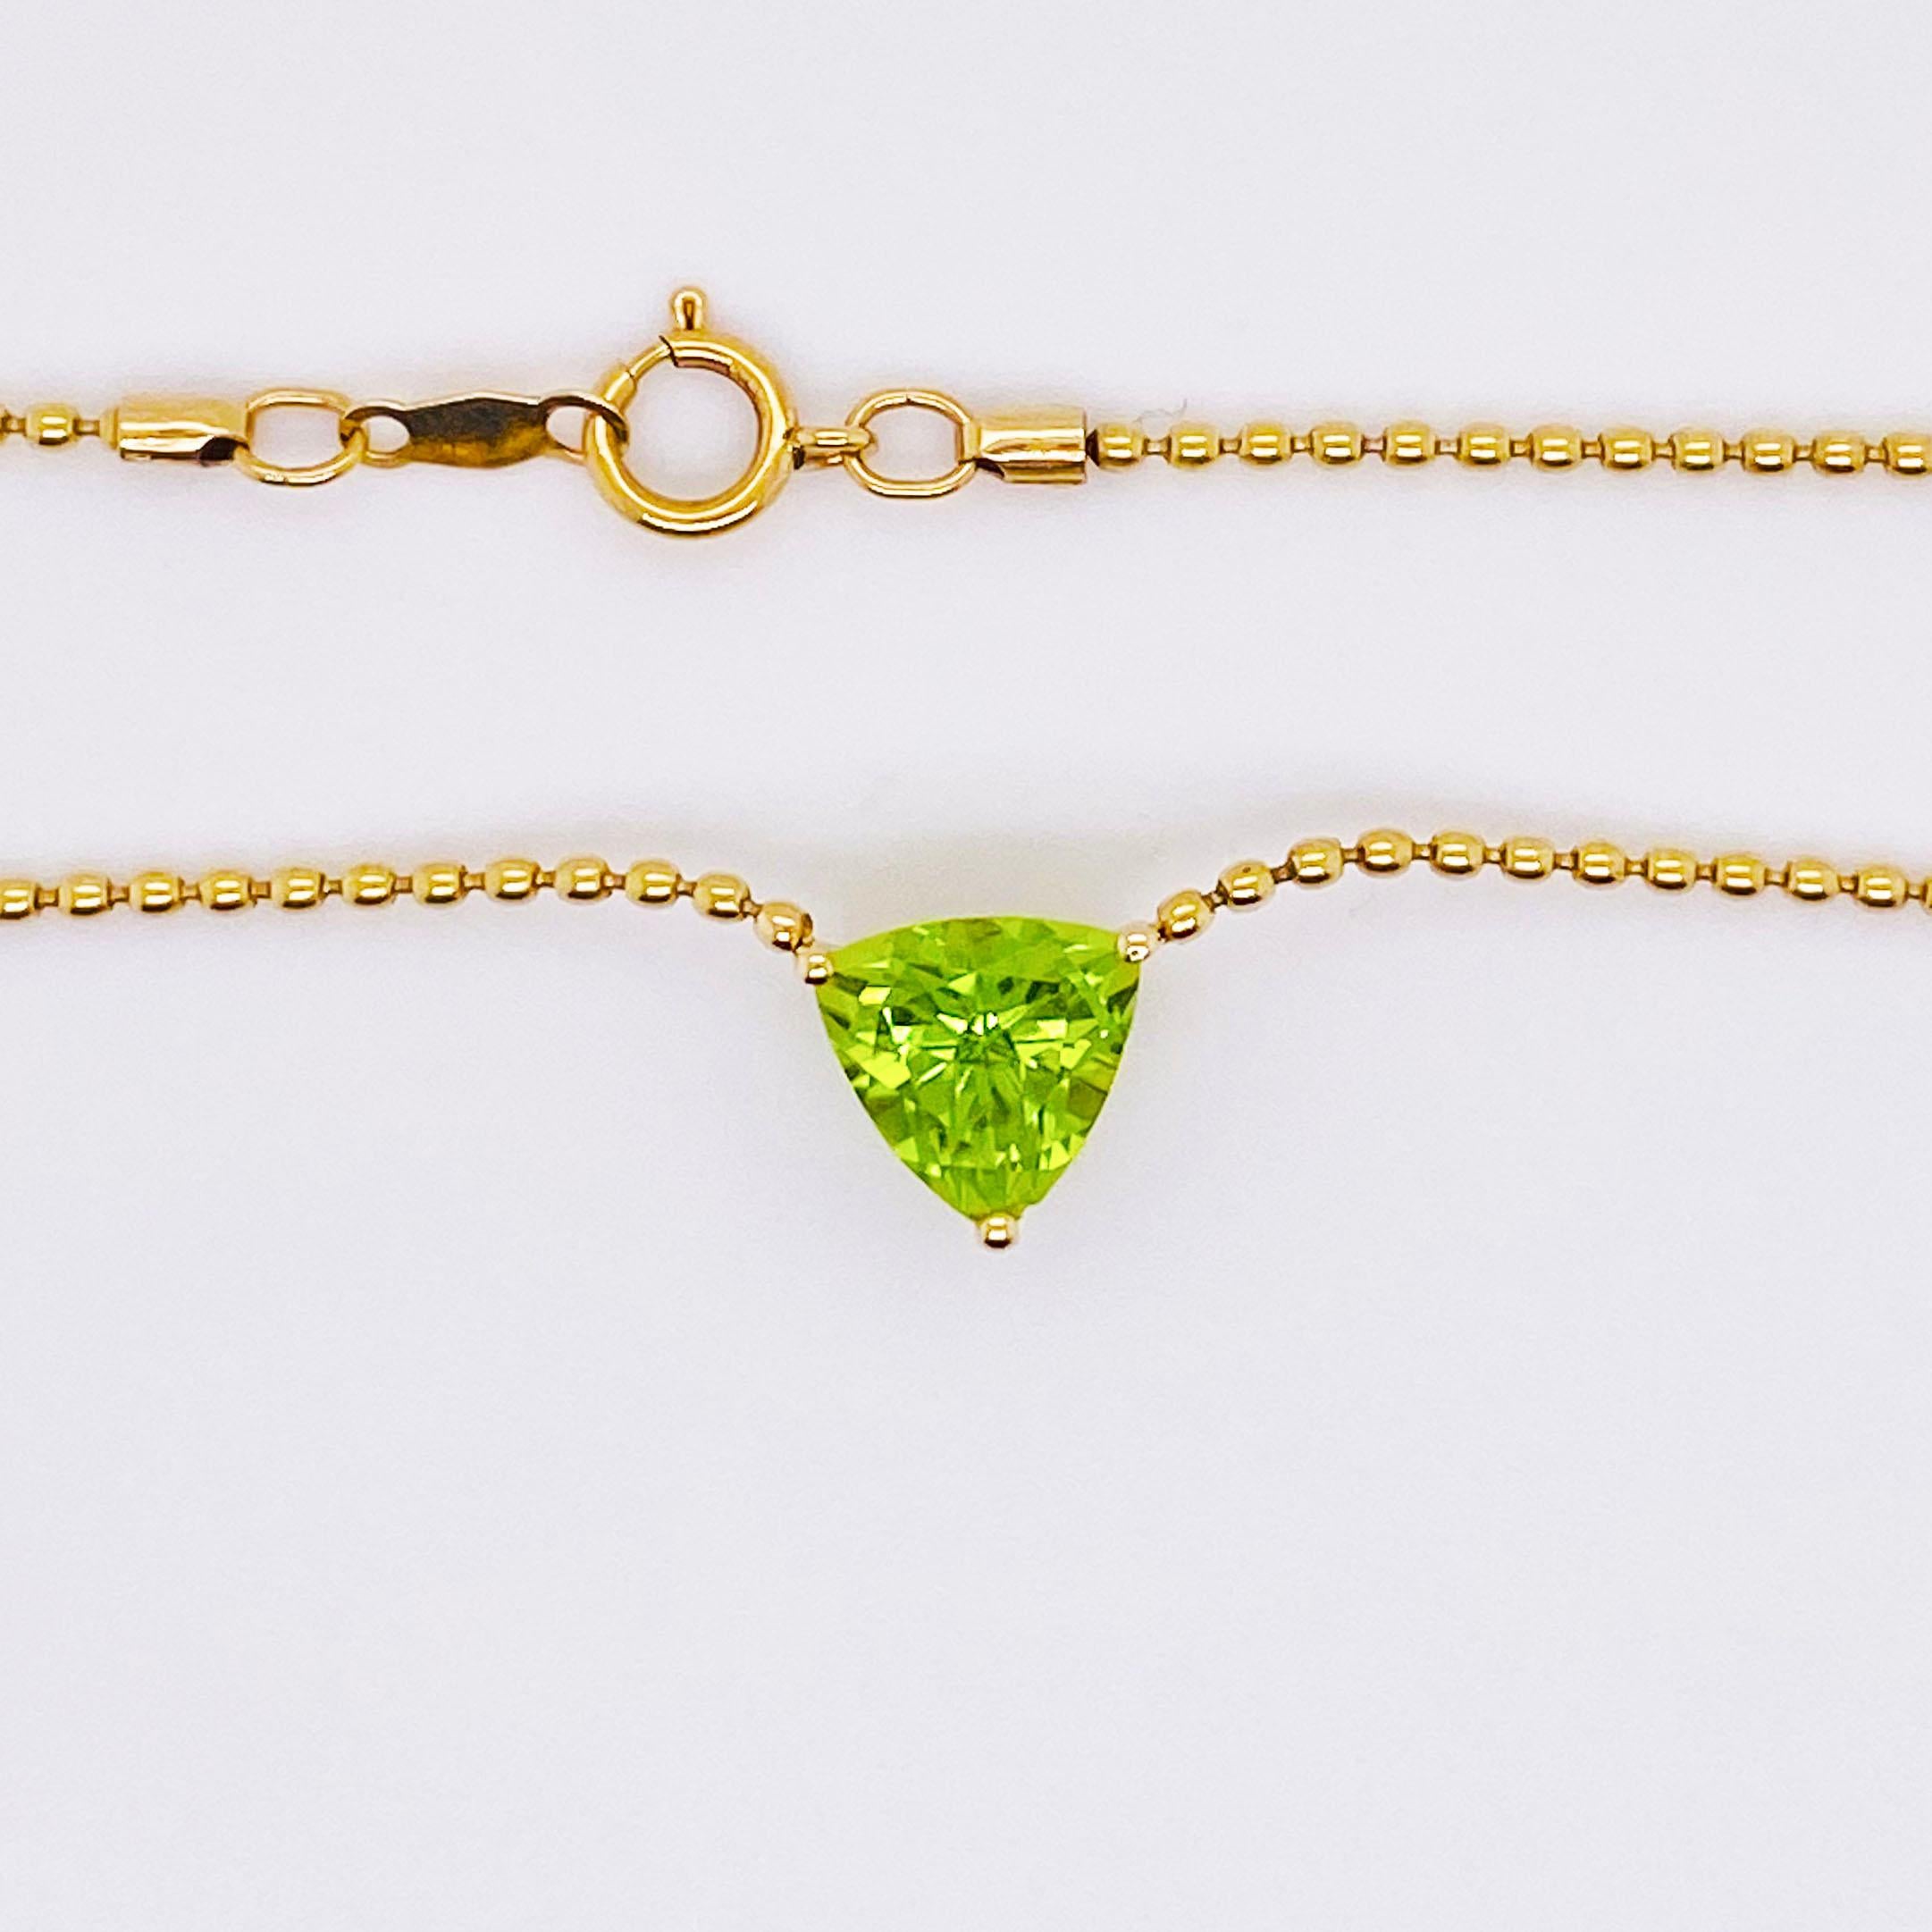 Trillion Peridot 1.25cts Stationary Pendant Necklace 14K Yellow Gold
This is a simple but exquisite peridot pendant with a 1.25 carat trillion (triangular brilliant cut) genuine gemstone set in a tailored setting.  The entire necklace is 14 karat